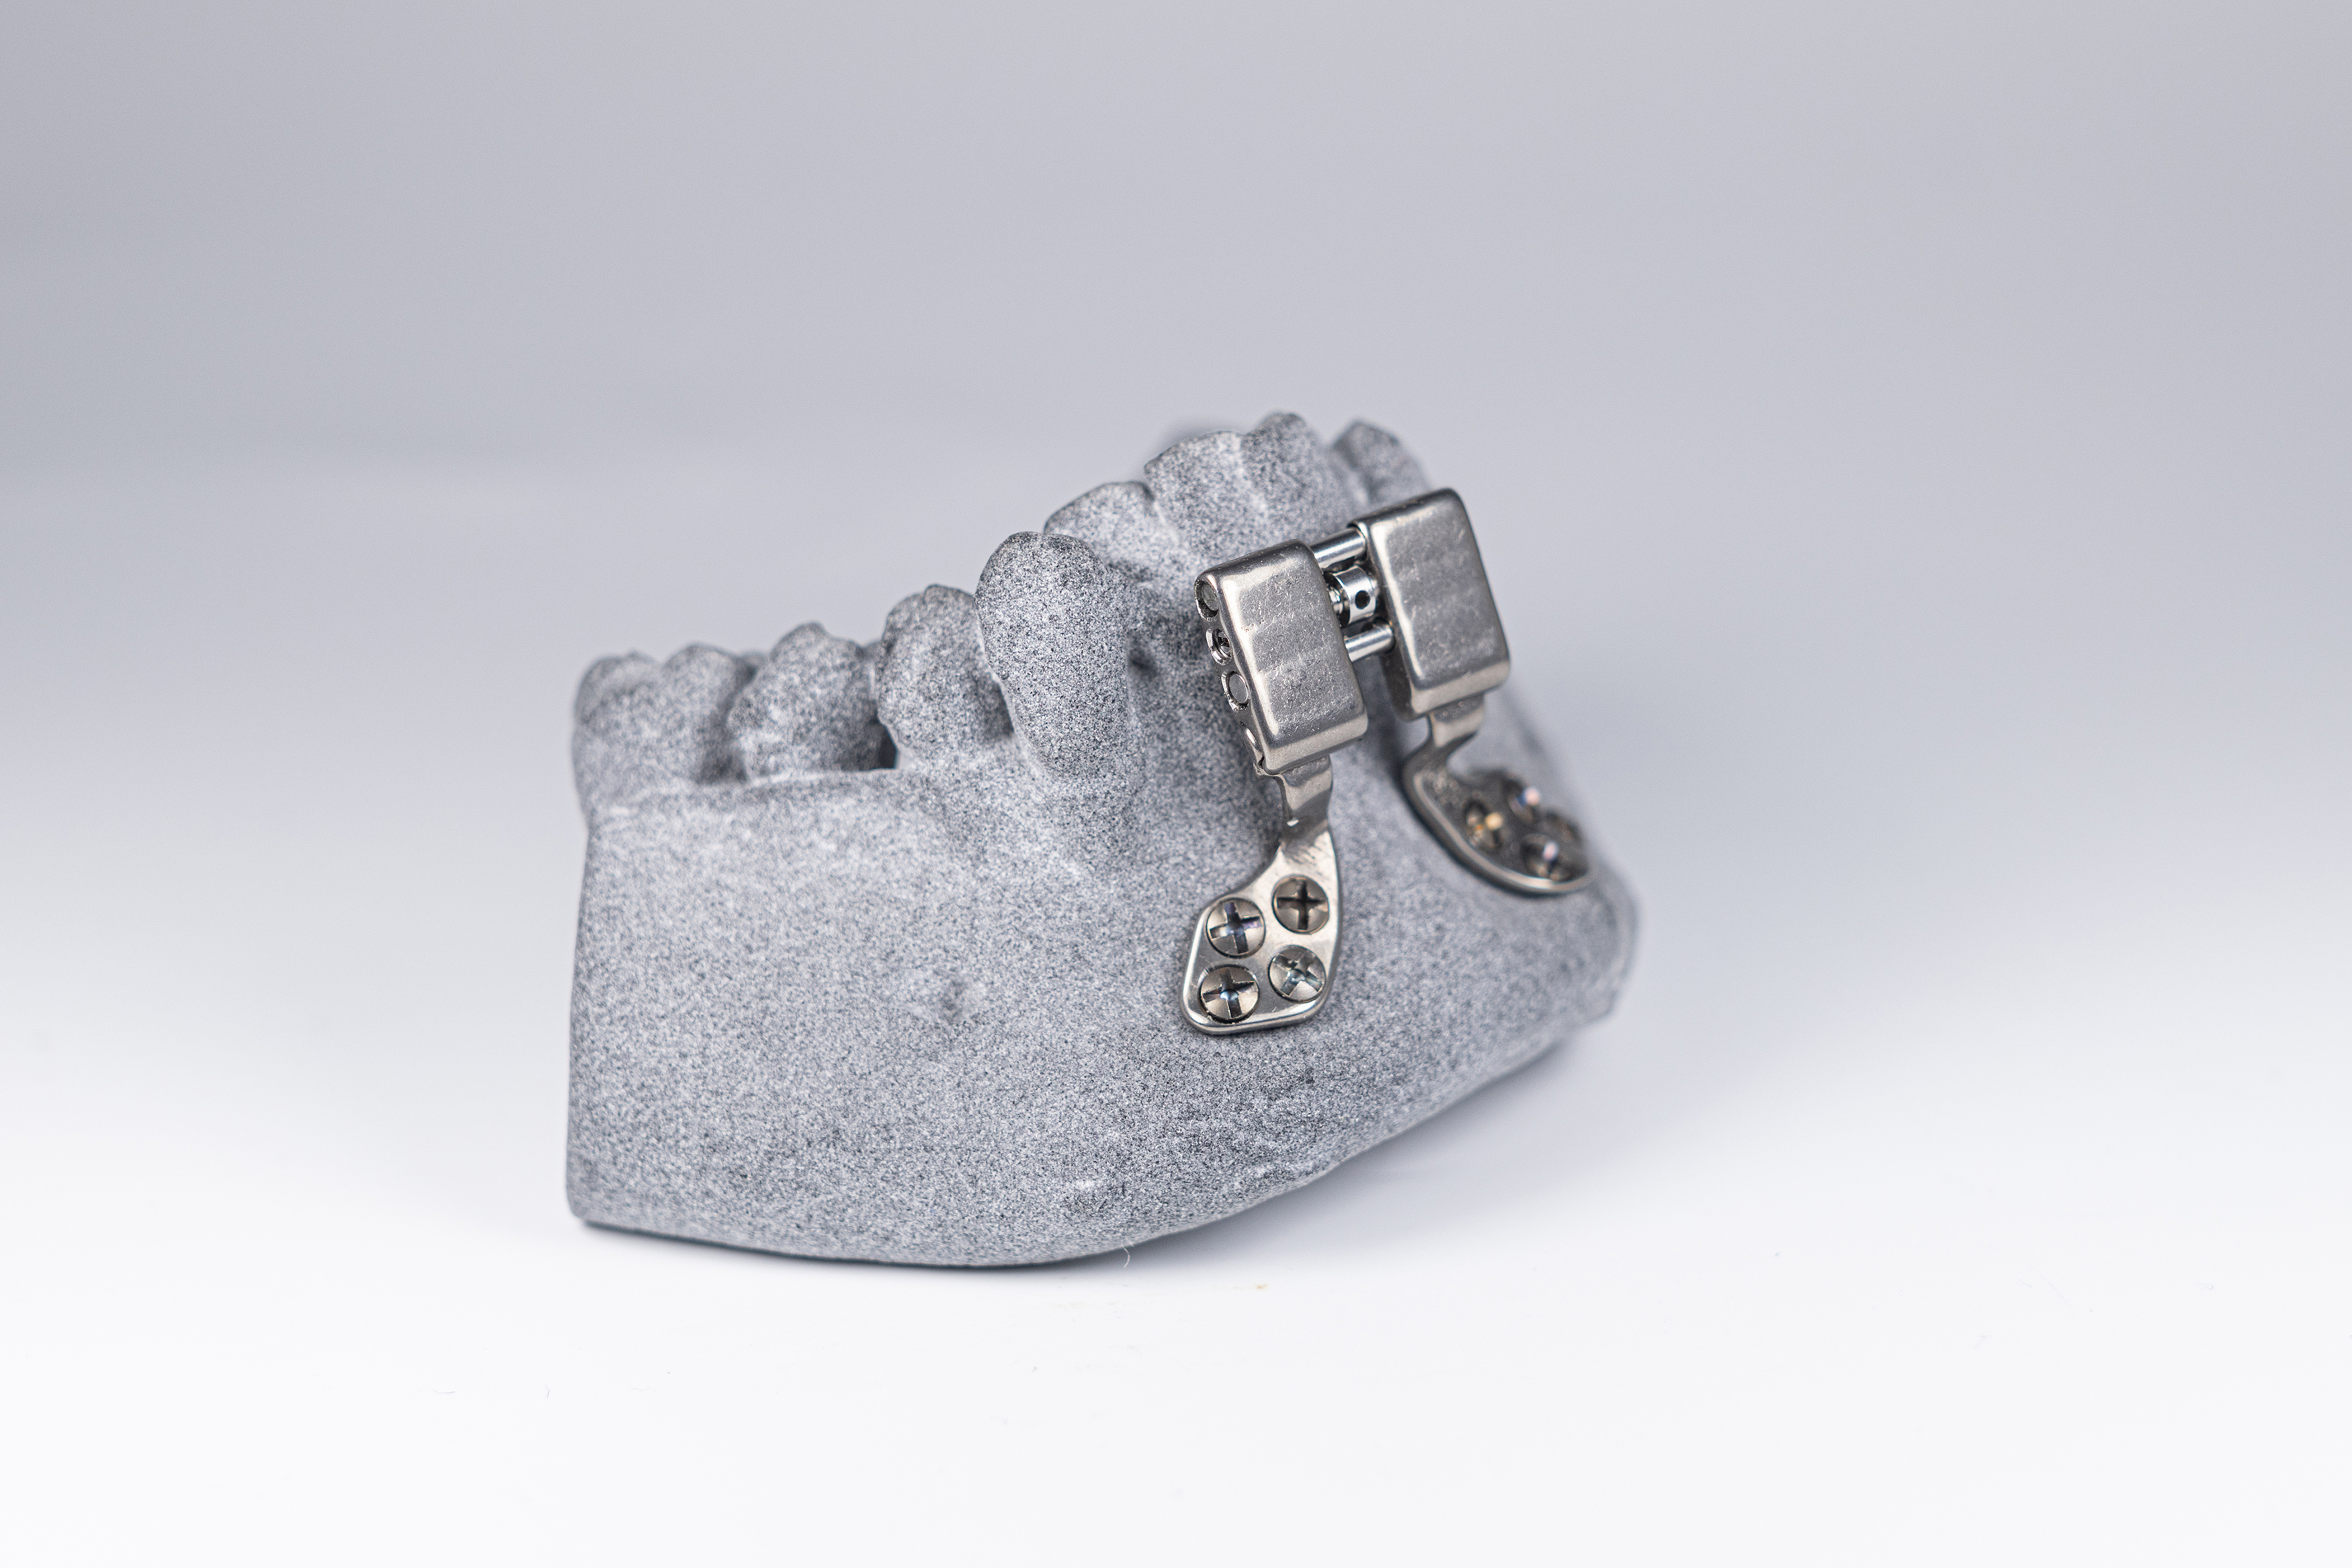 Today, orthodontic distractors are manufactured as a standard part and only adjusted during the surgical process: tedious and uncomfortable for the patient. Additive manufacturing is designed to shorten lead times and enable an individualized fit for the patient.